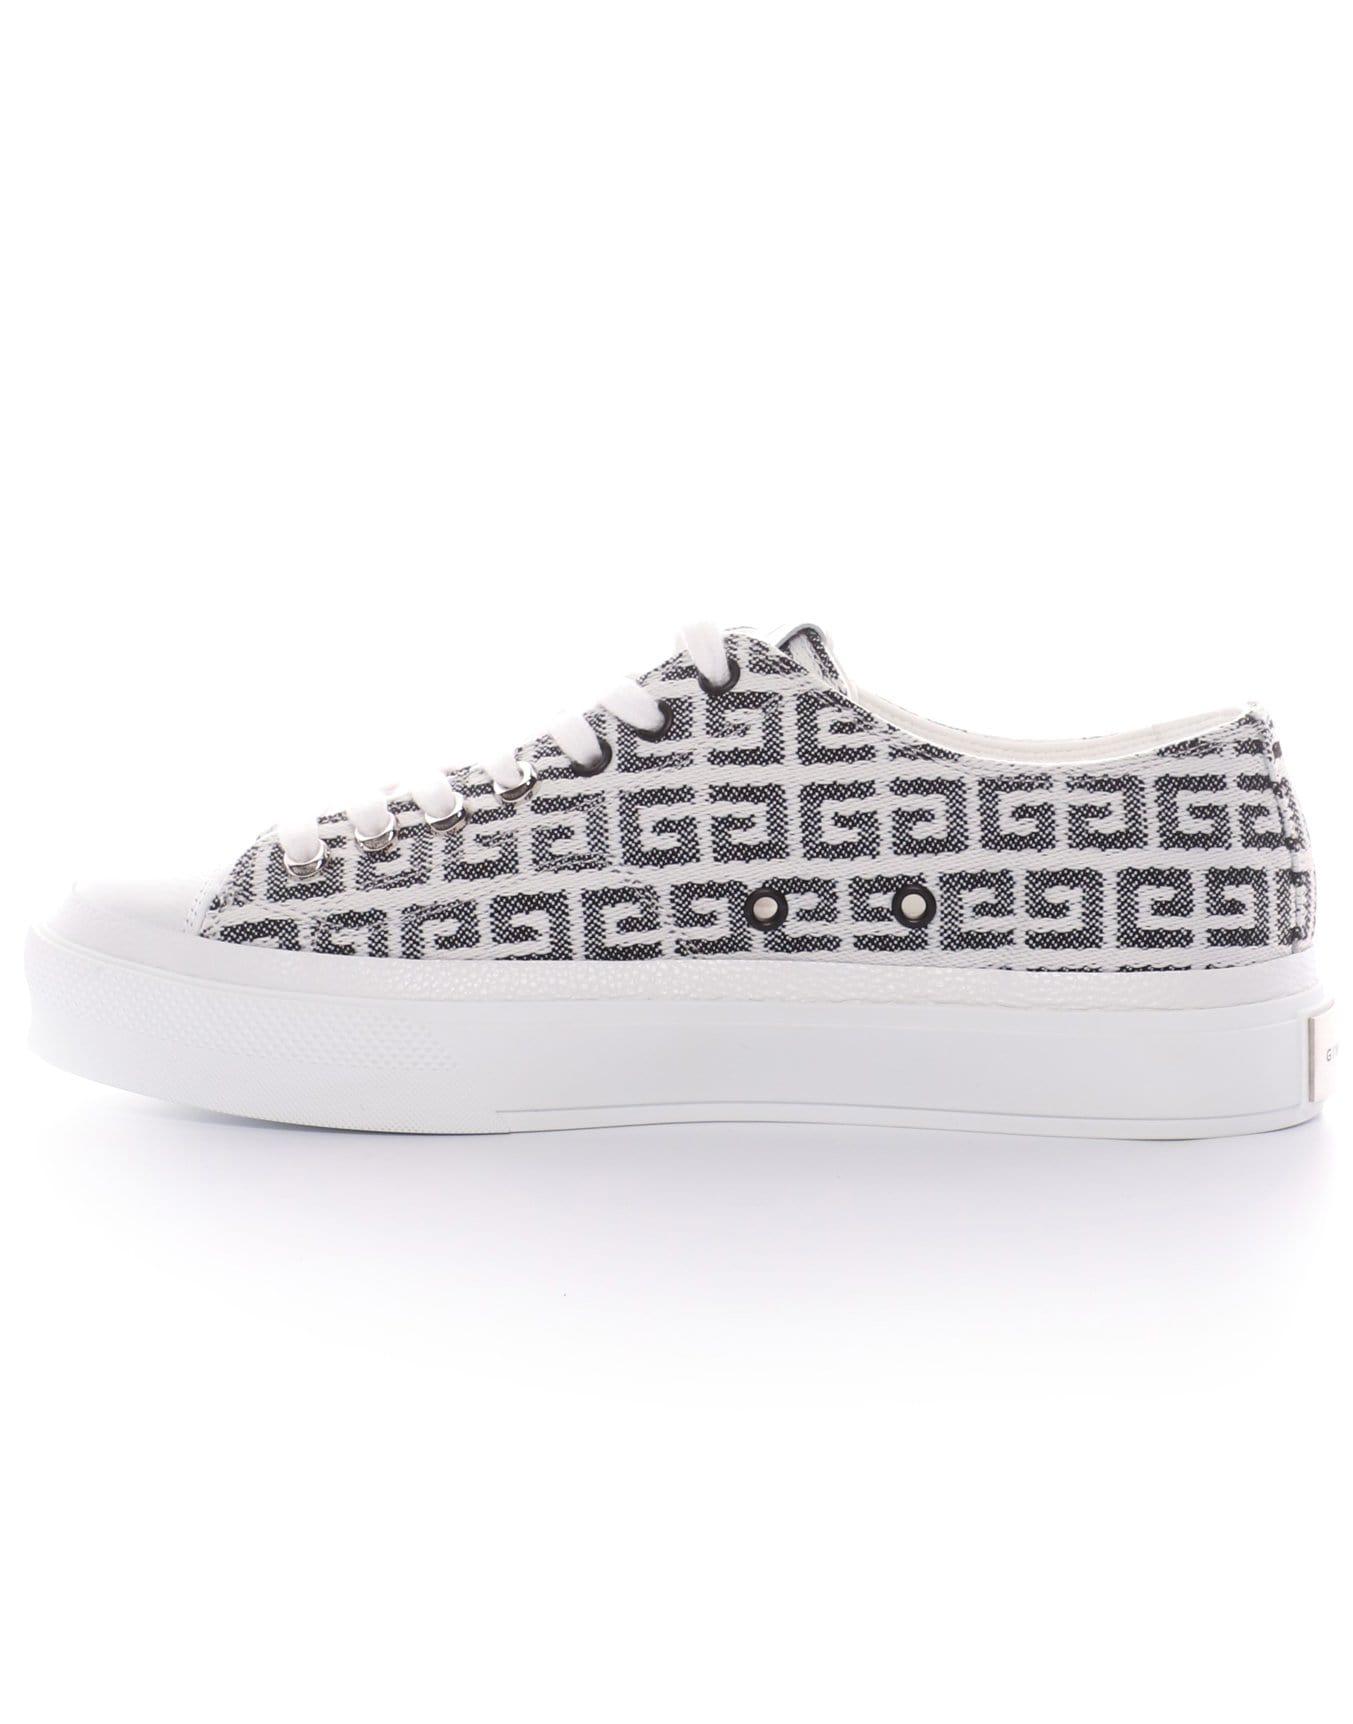 Givenchy Denim Sneakers City In 4g Jacquard in Black (White) - Lyst